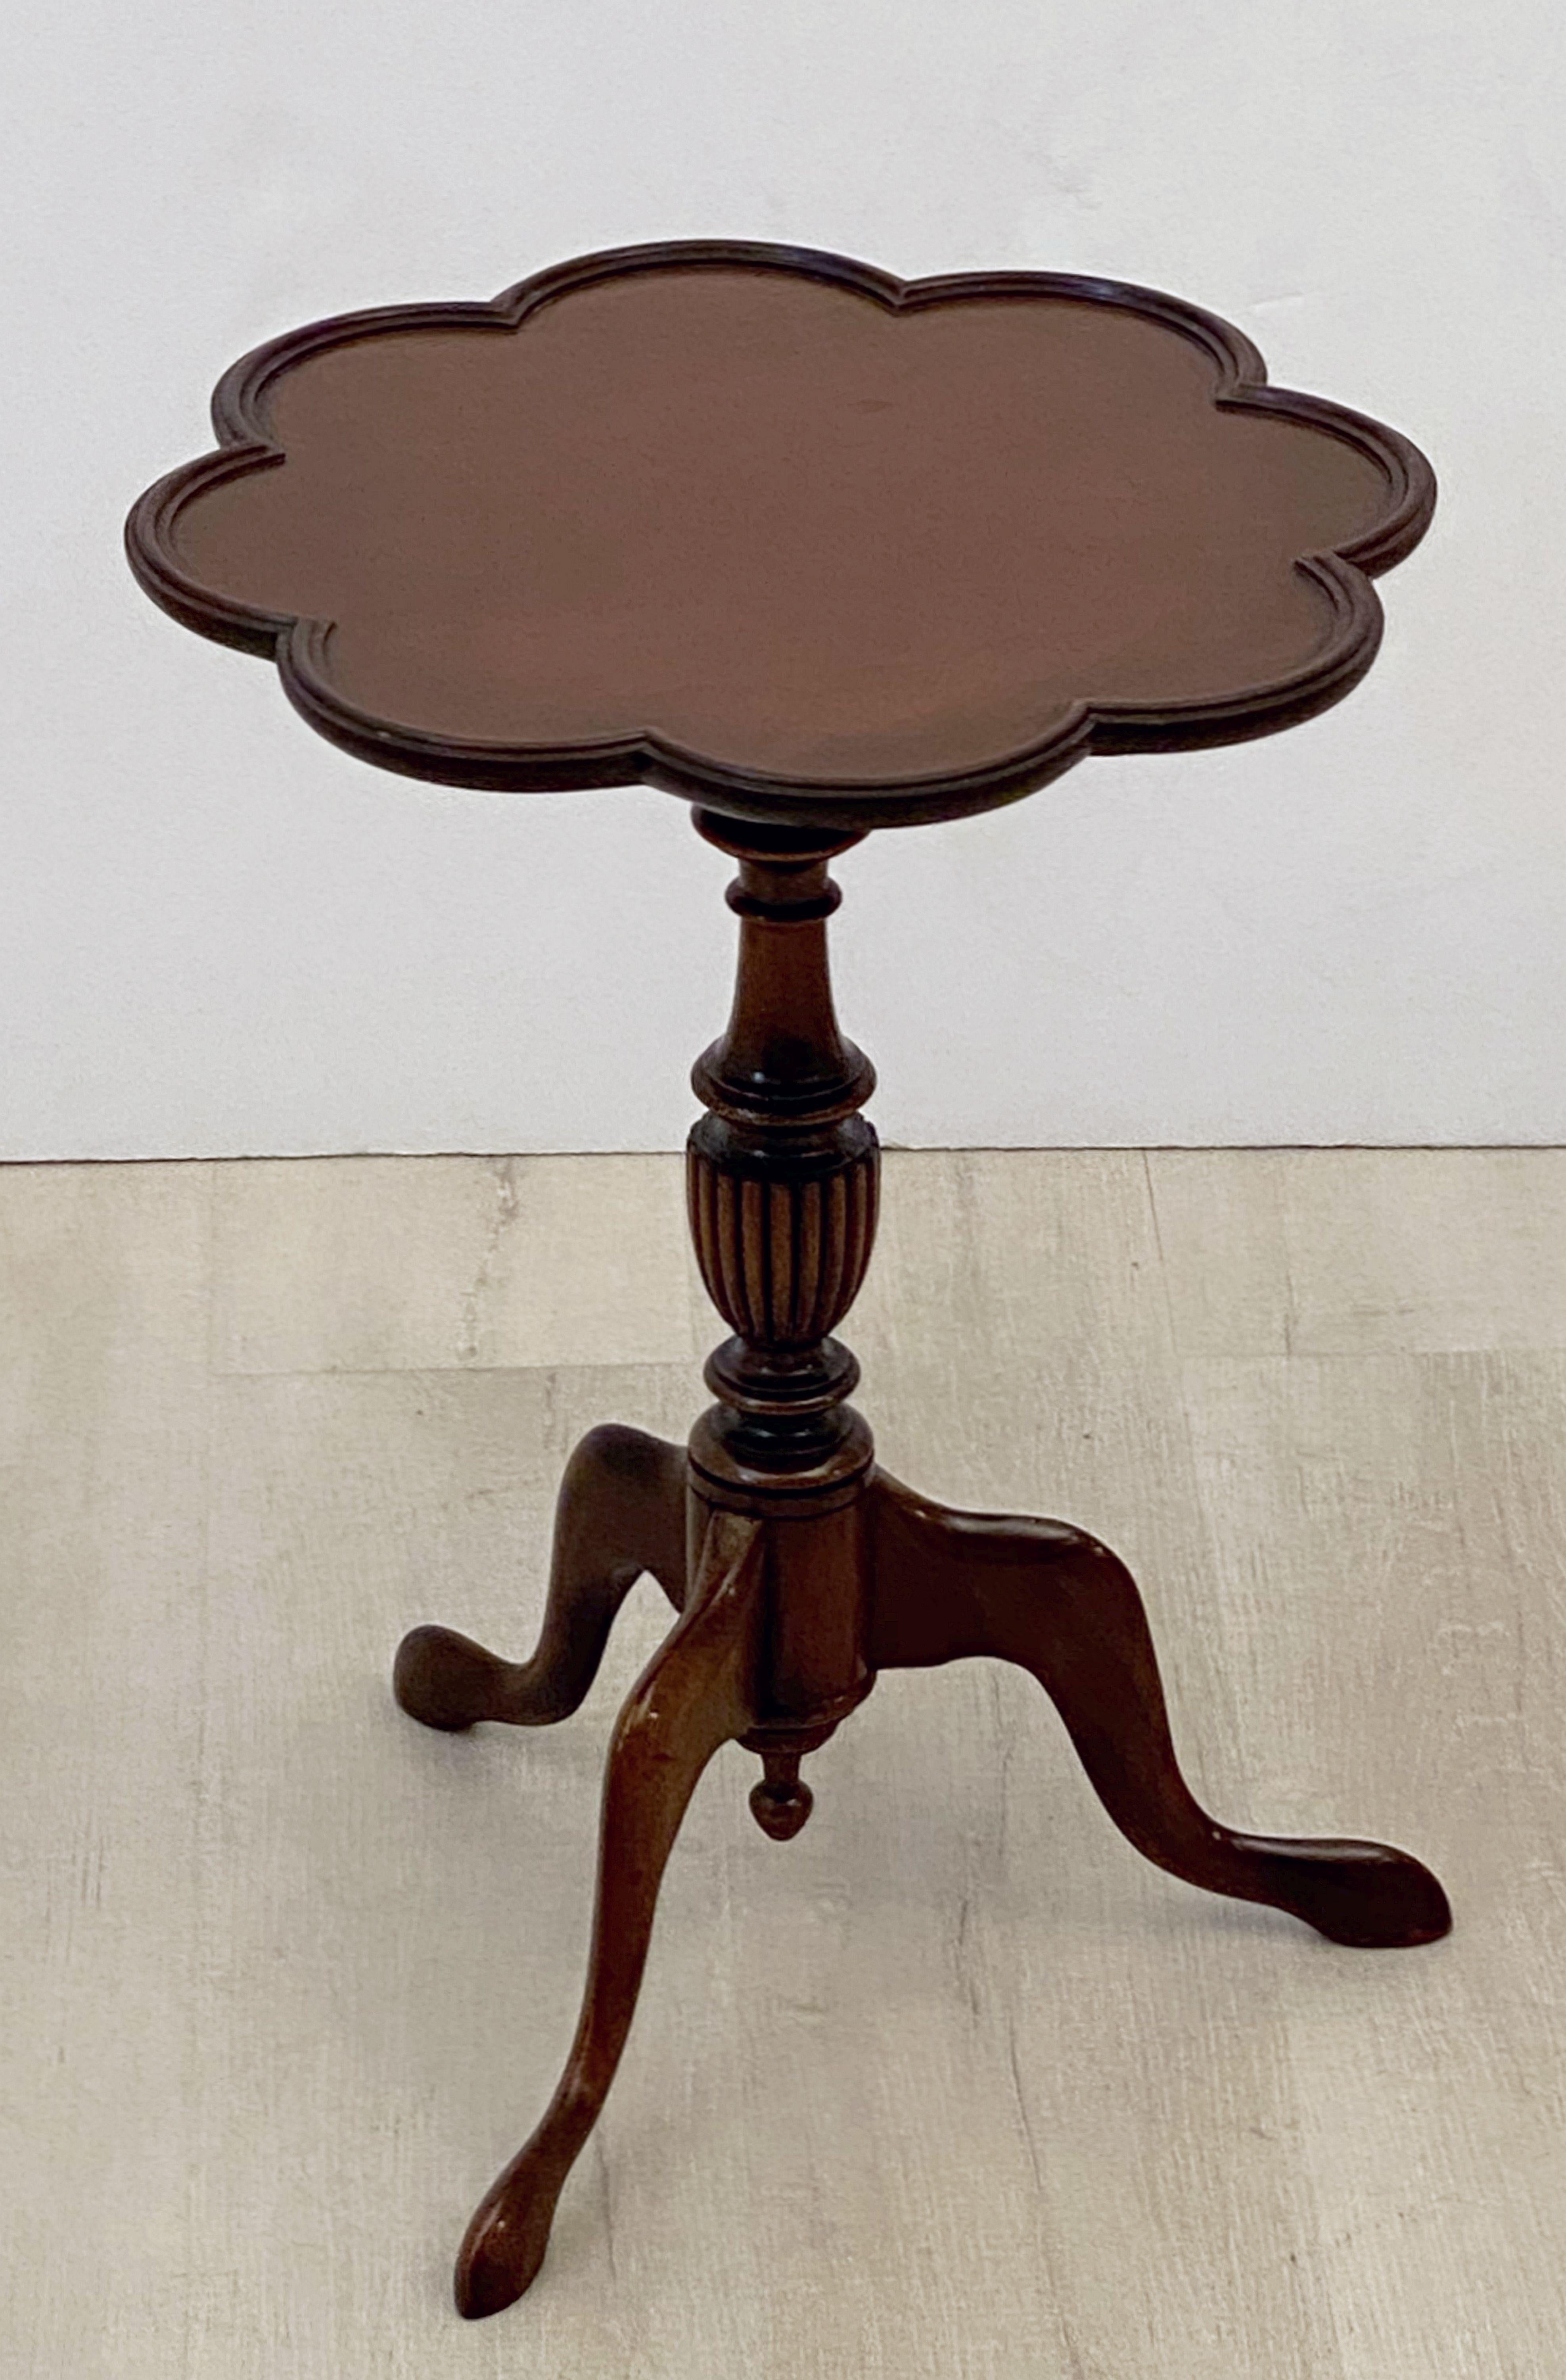 An English wine table of mahogany from the Edwardian era, featuring a raised edge around the circumference of the scalloped, moulded top, mounted upon a turned column pedestal with tripod base.

An excellent choice as a side table or for serving.